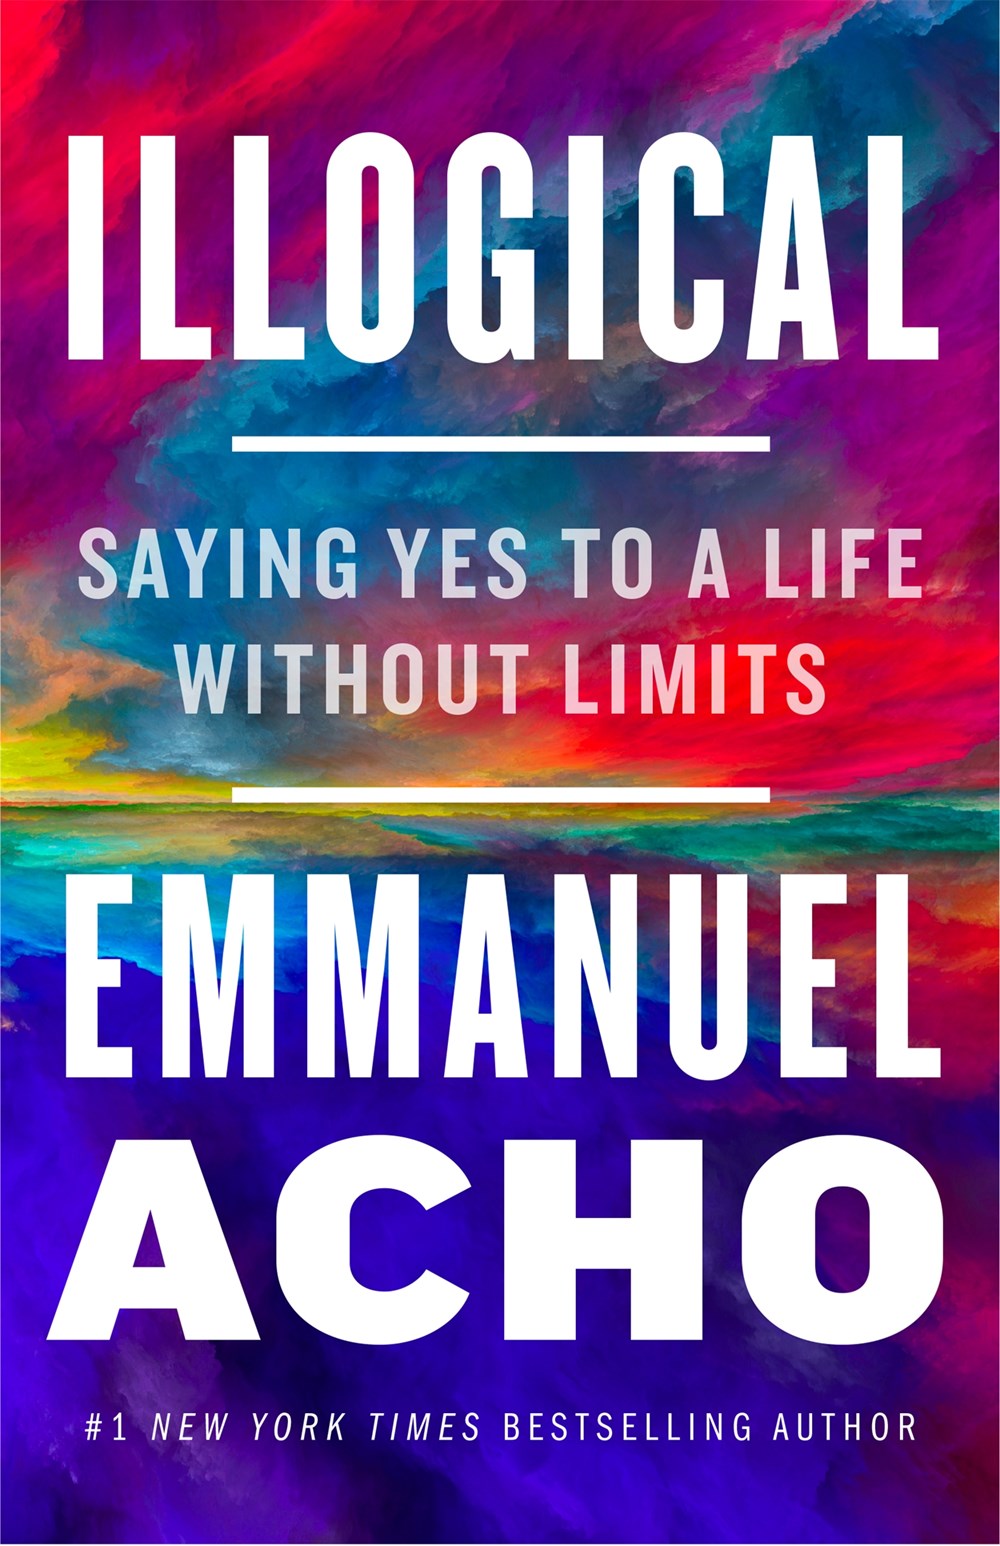 Image for "Illogical: Saying Yes to a Life Without Limits"